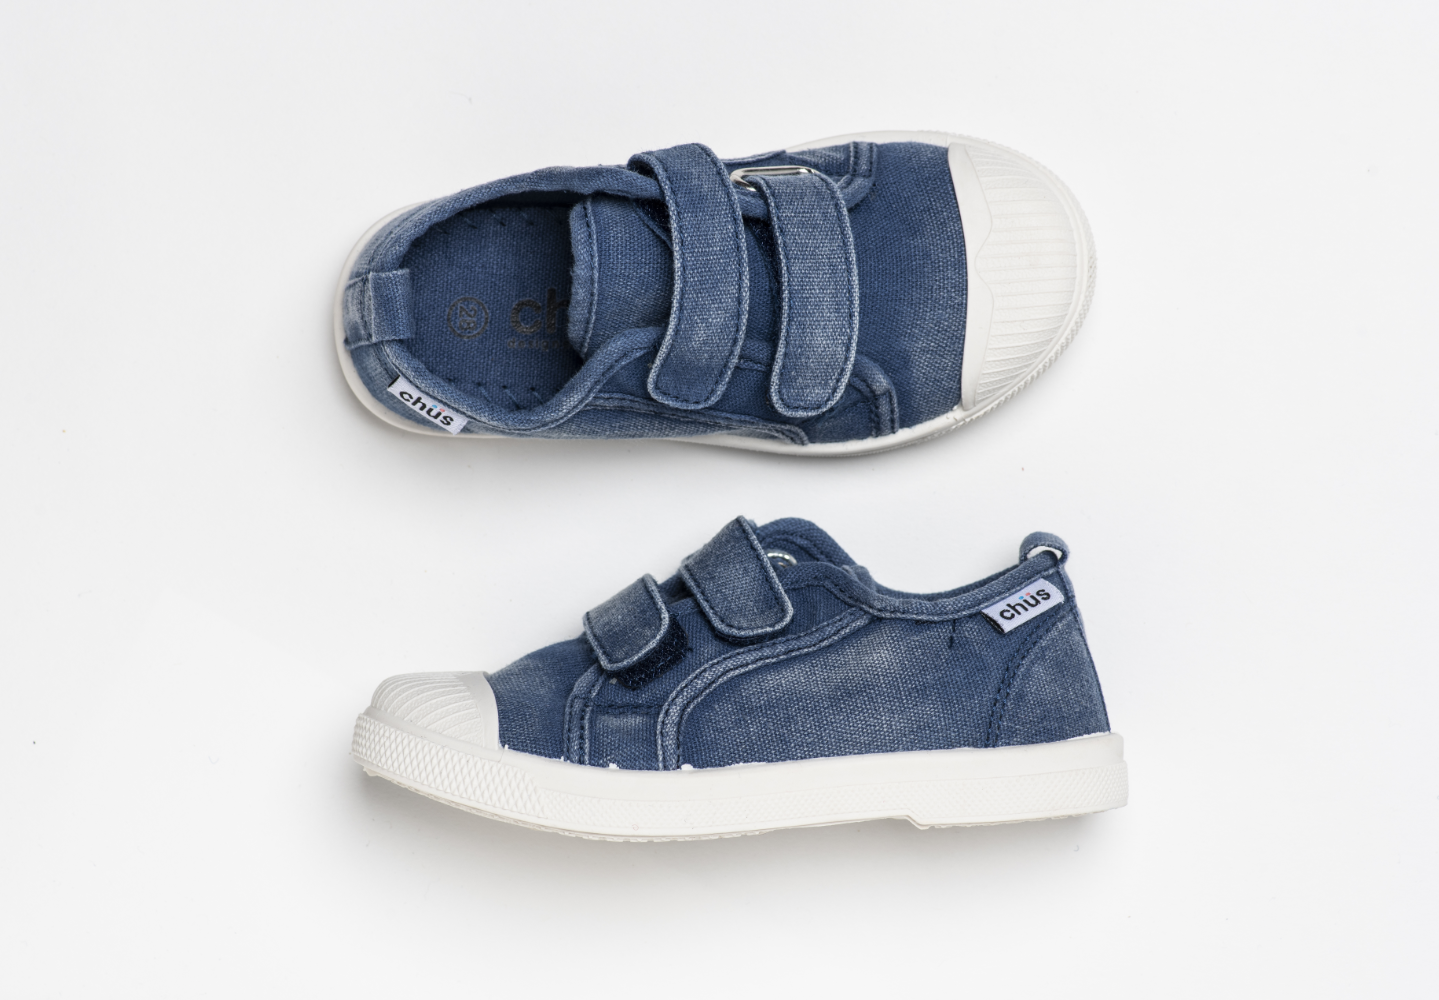 Distressed navy canvas sneakers with double velcro straps. Chus Shoes. Top view.